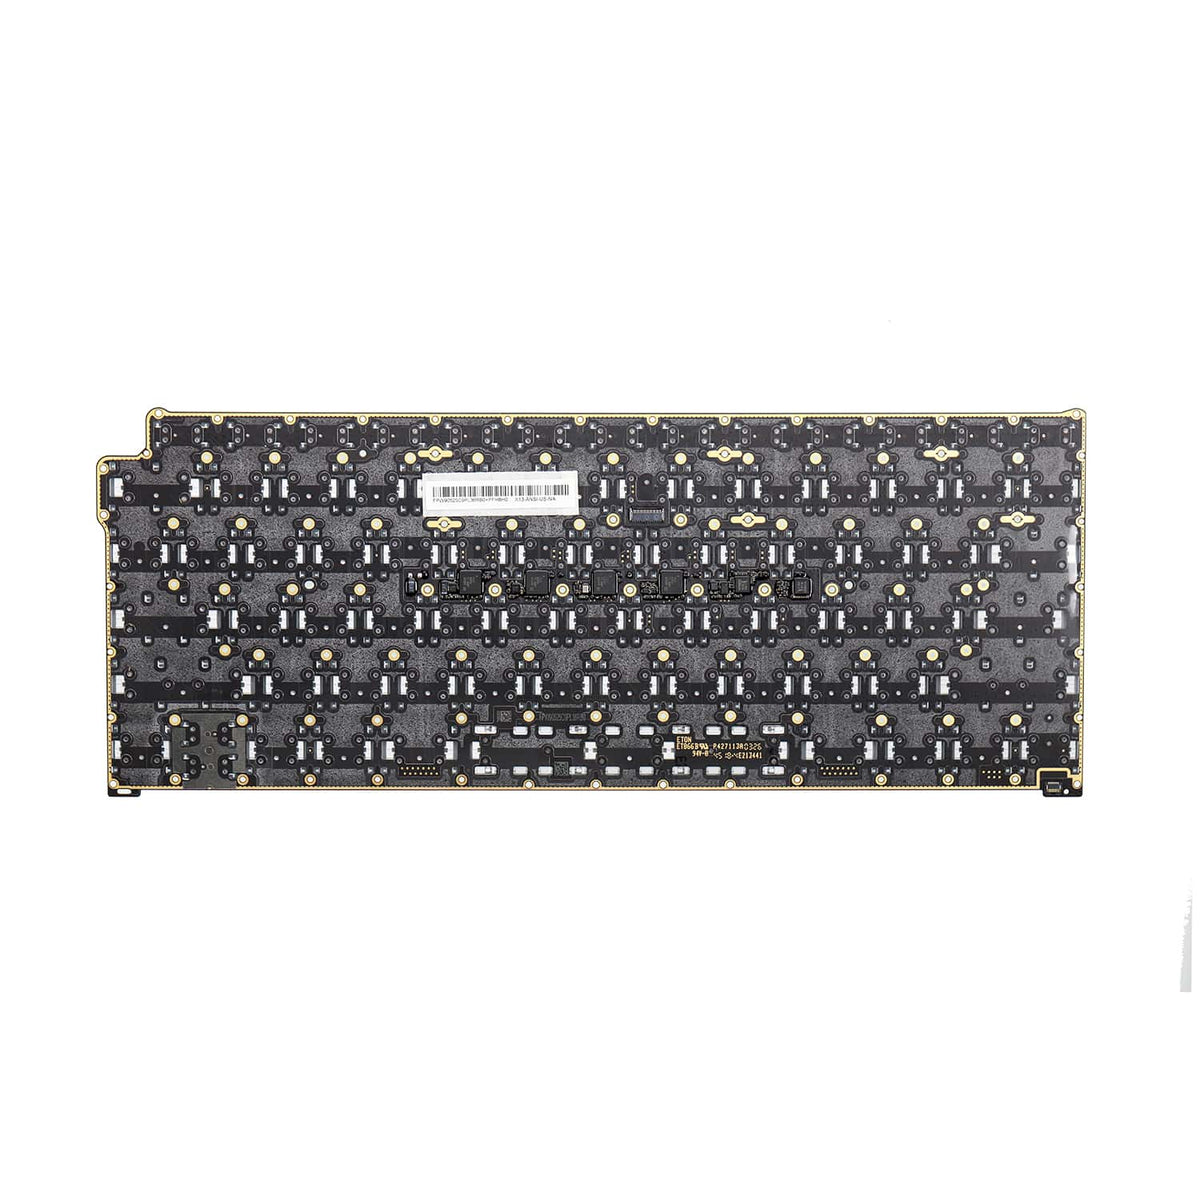 KEYBOARD (UK ENGLISH) FOR MACBOOK PRO A1989/A1990 MID 2018-MID 2019